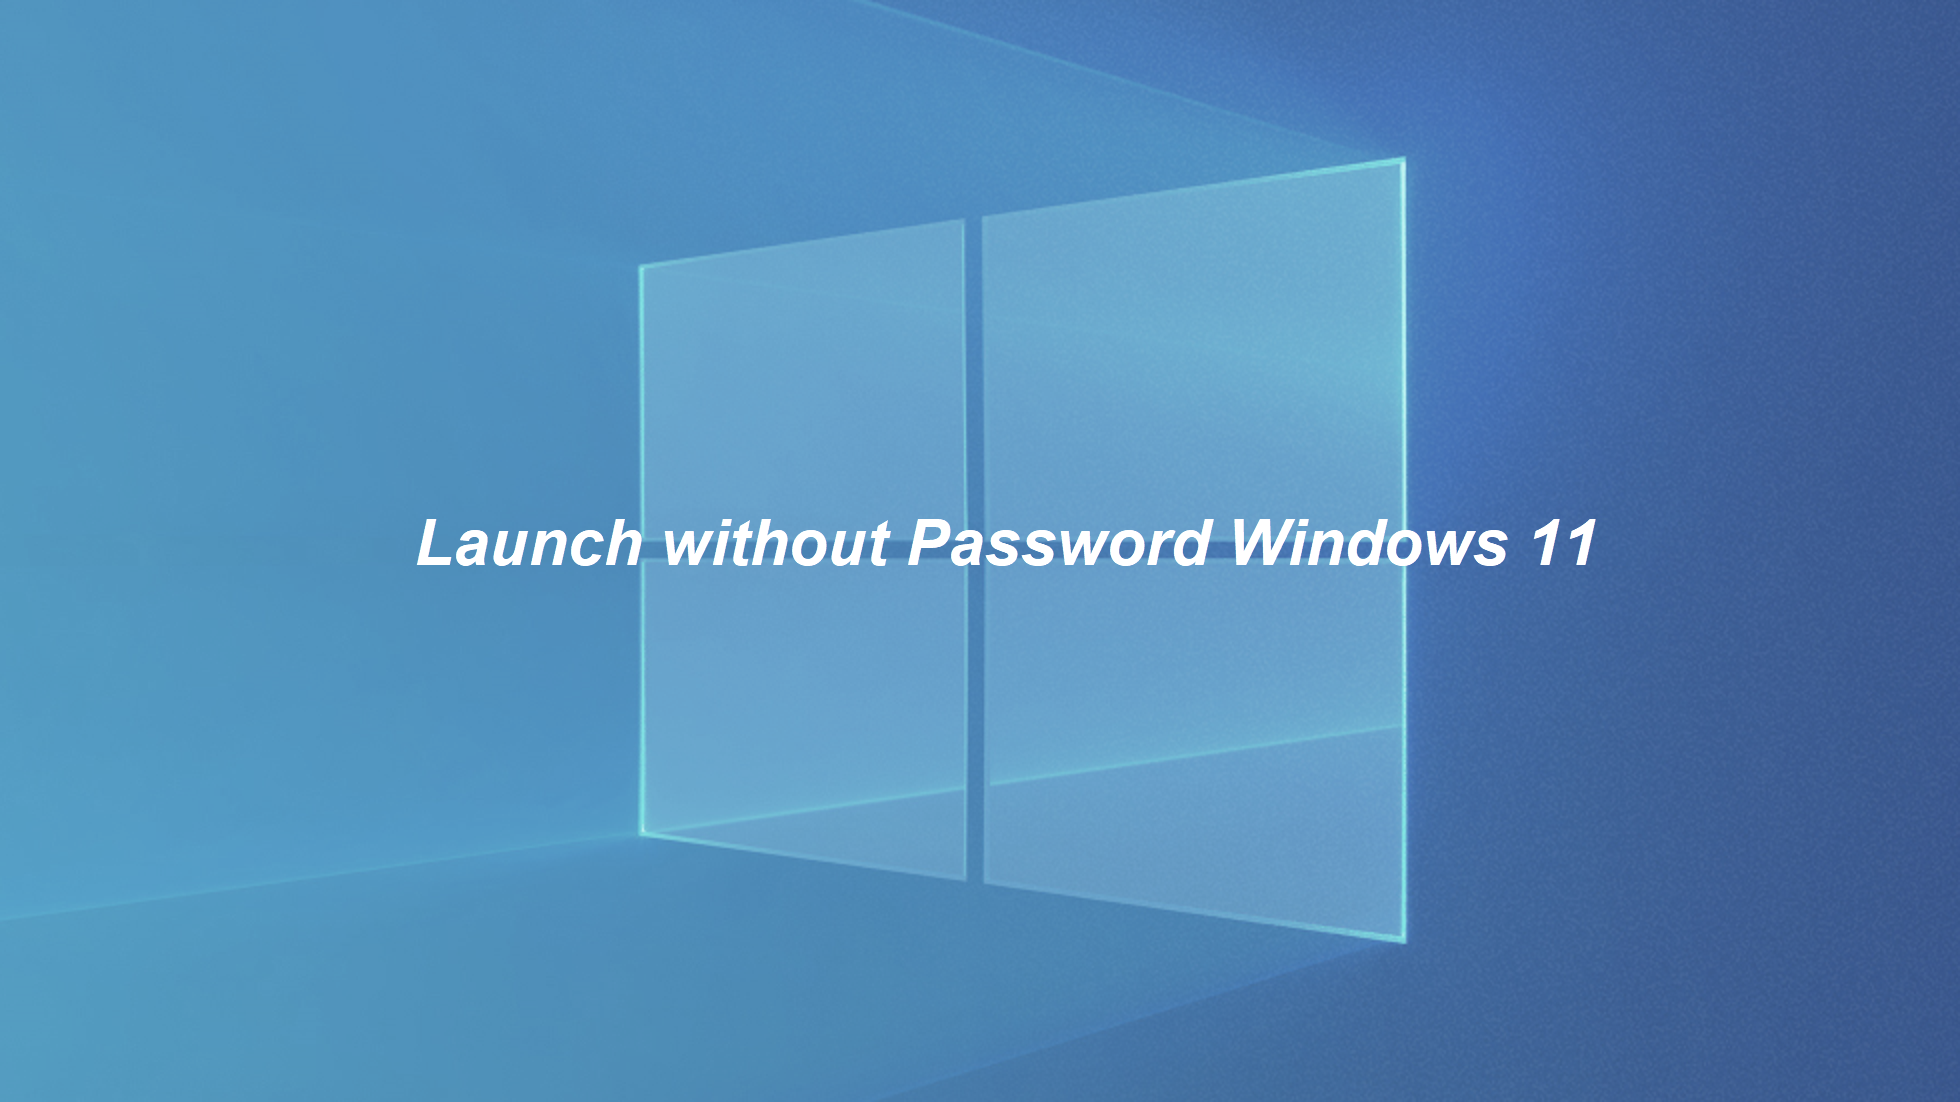 How to Launch Windows 11 without Password - Microsoft Community Hub